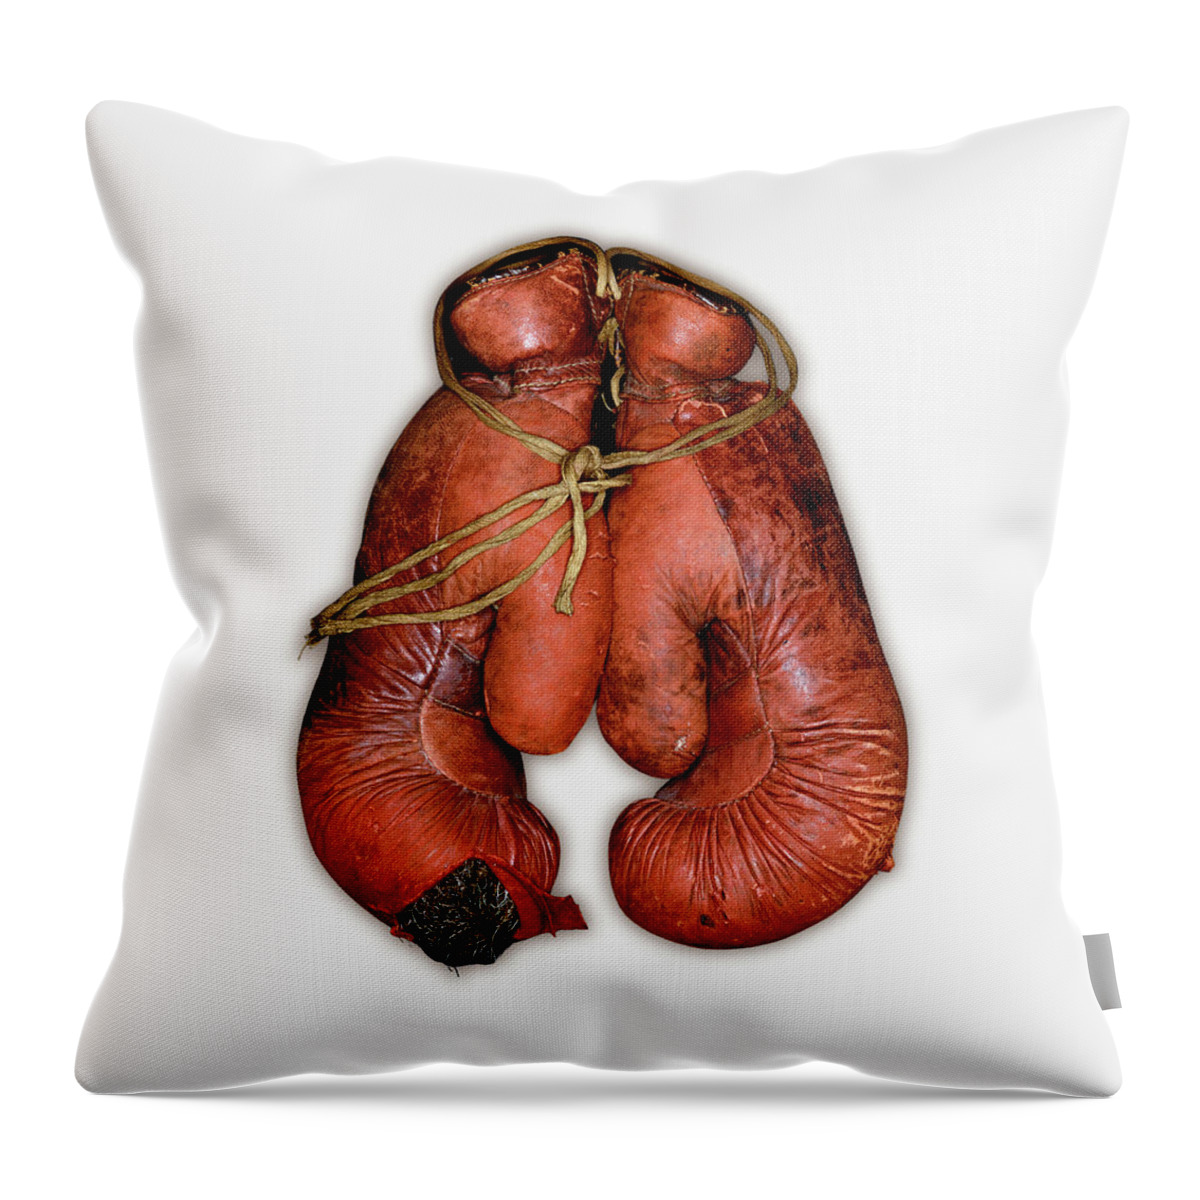 White Background Throw Pillow featuring the photograph Pair Of Boxing Gloves, Close-up by John Rensten